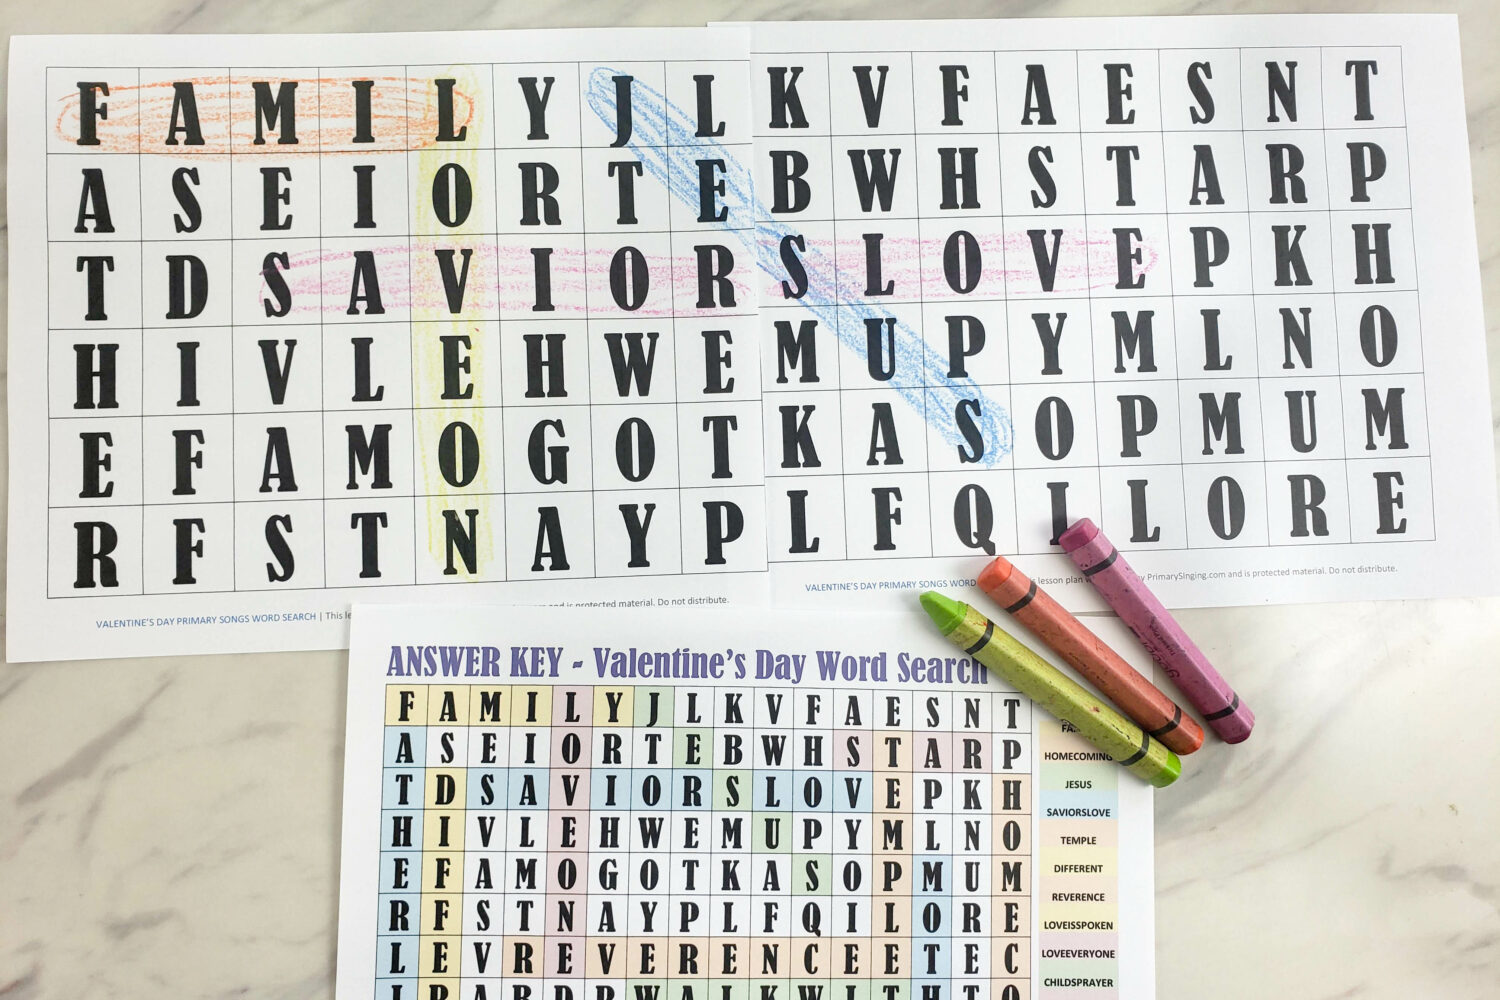 Primary Songs Valentine Word Search! This fun printable game includes a variety of LDS Primary Songs that are perfect for Valentine's Day